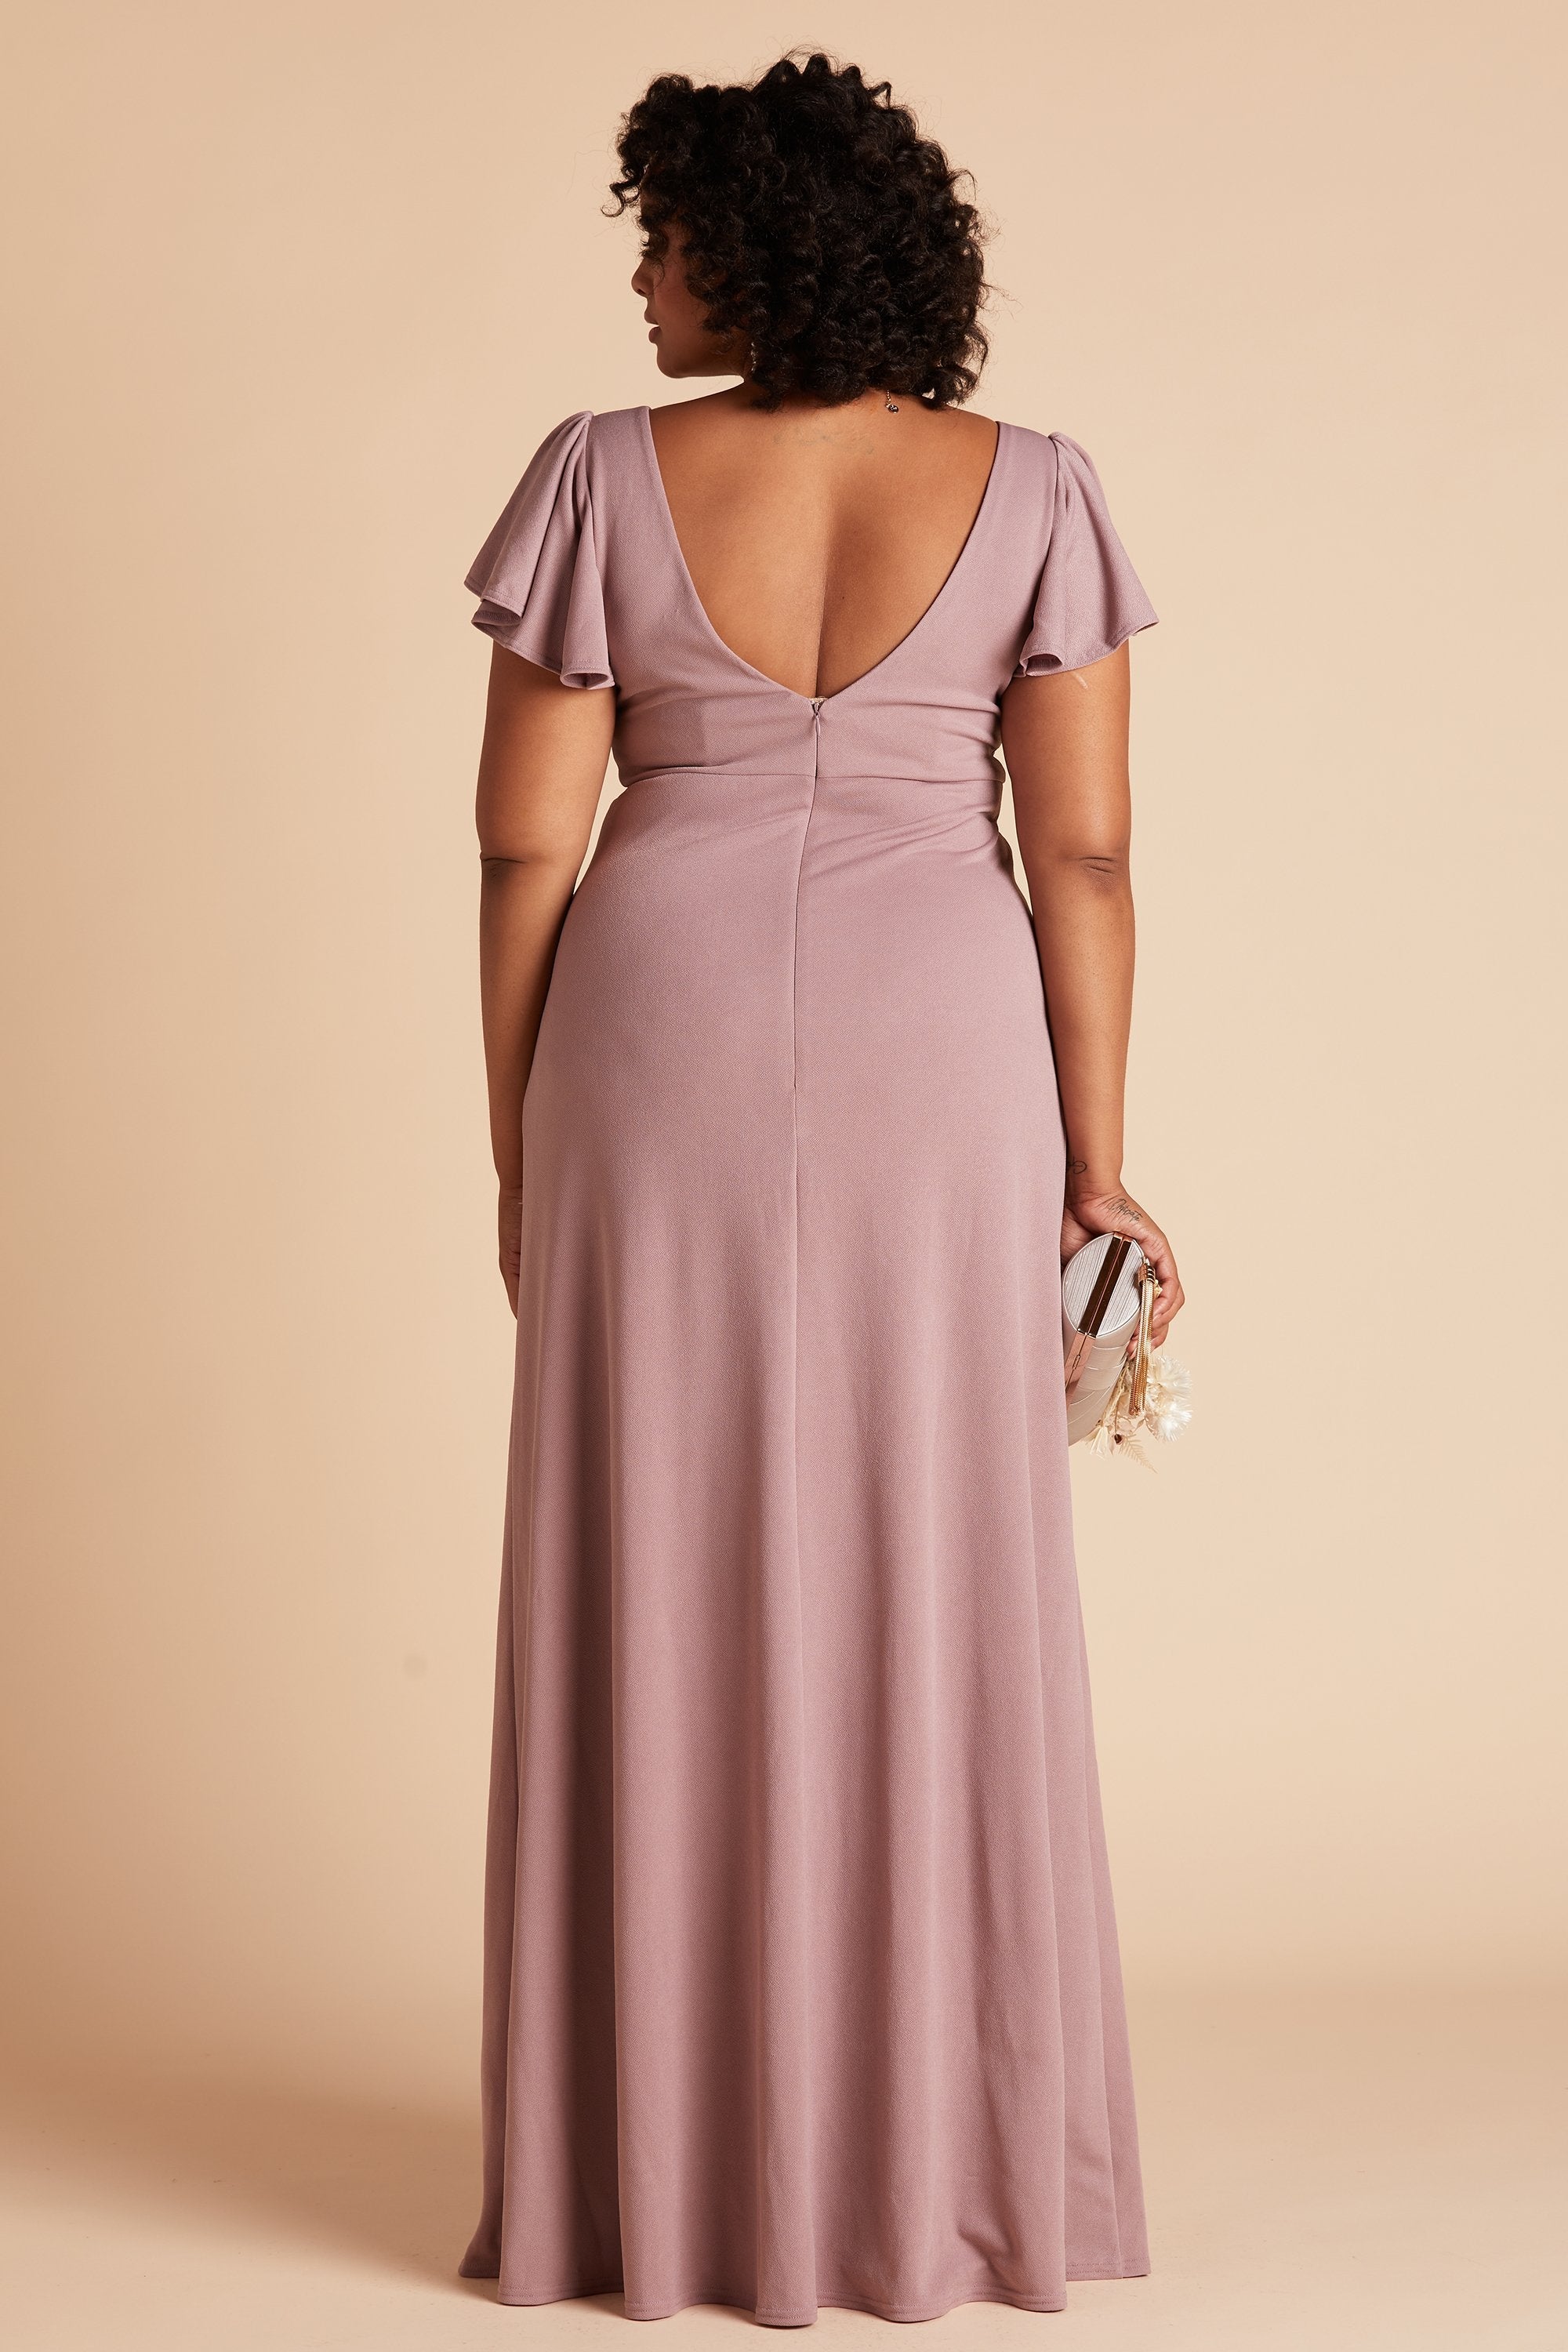 Hannah plus size bridesmaid dress with slit in dark mauve crepe by Birdy Grey, back view